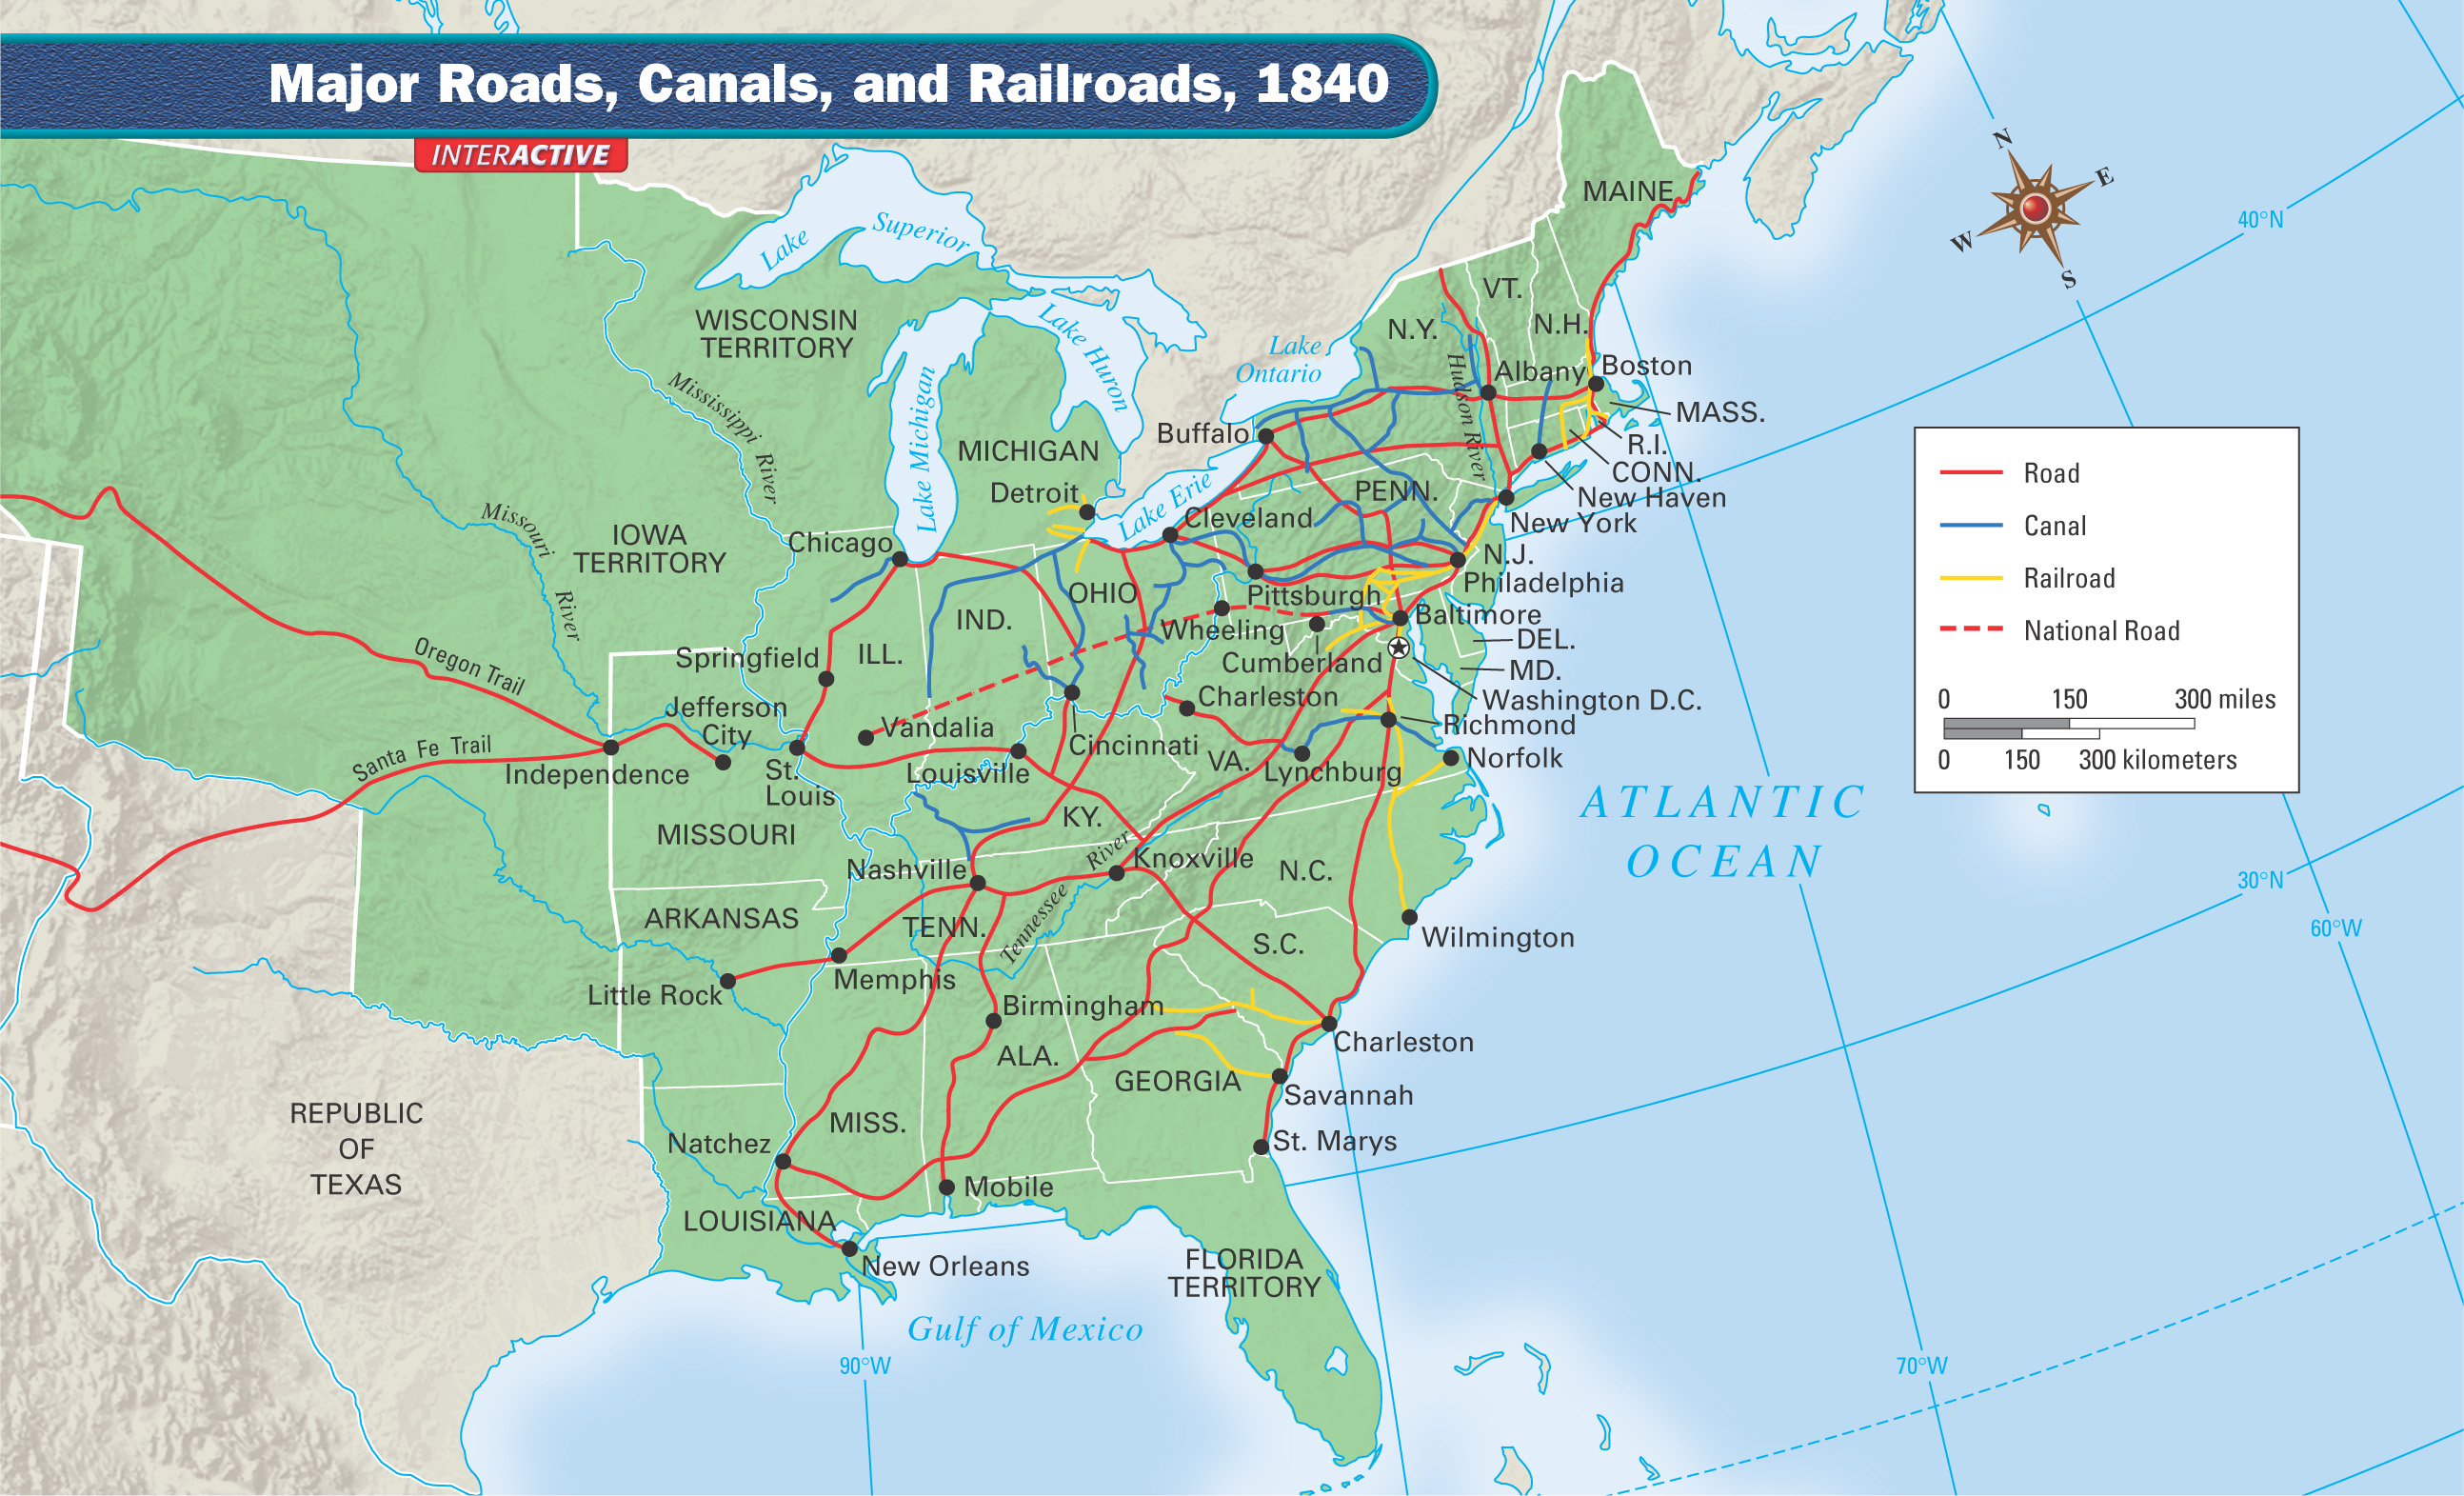 A map of the eastern U.S. shows the major roads, canals and railroads in 1840.